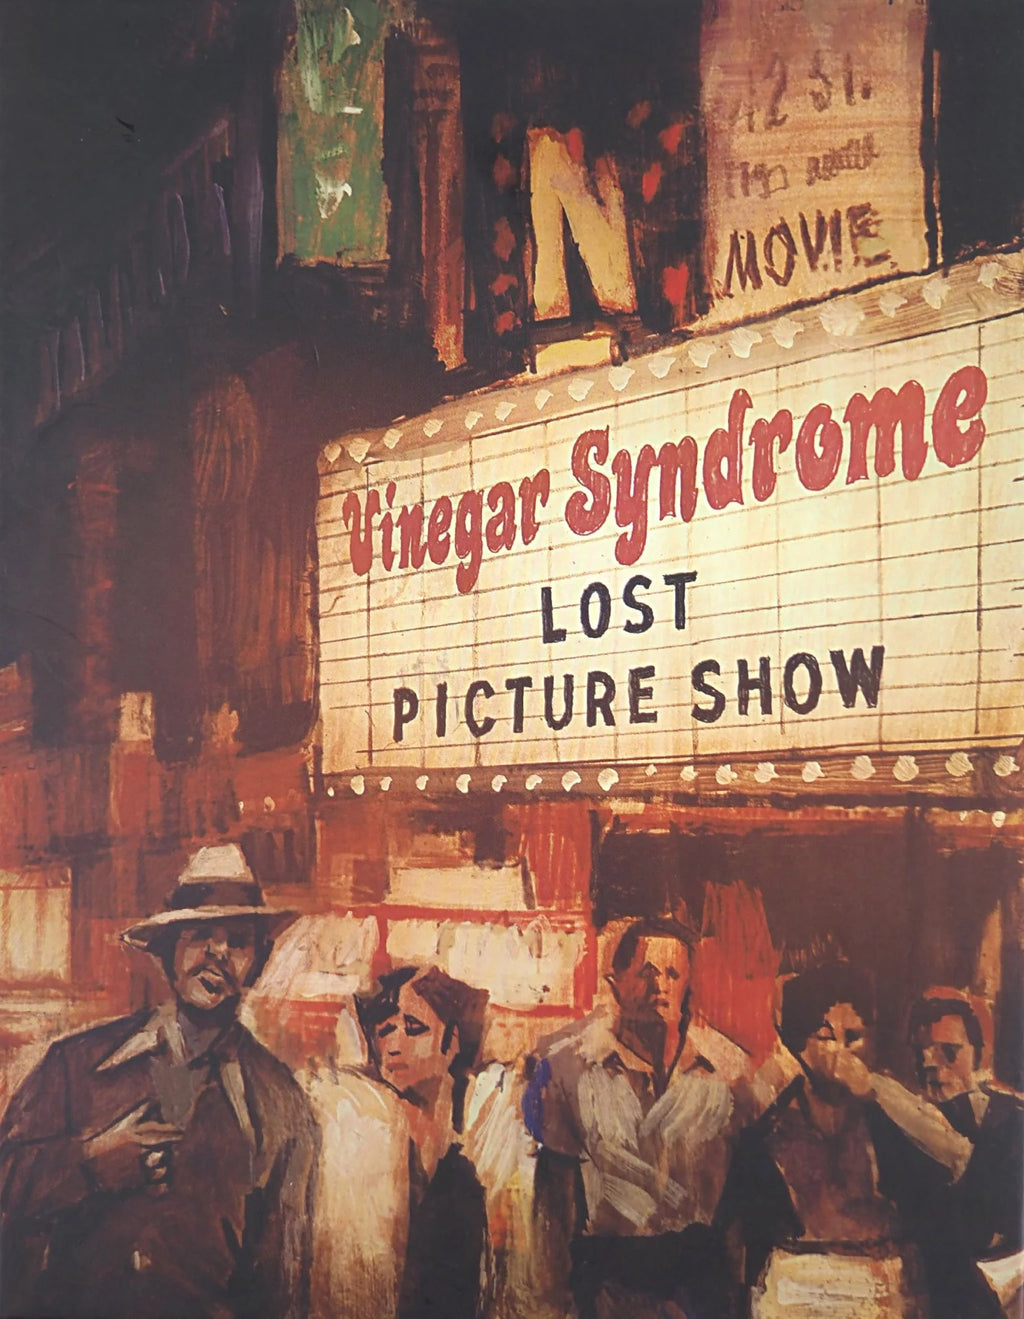 Lost Picture Show Limited Edition Vinegar Syndrome Blu-Ray Box Set [NEW]